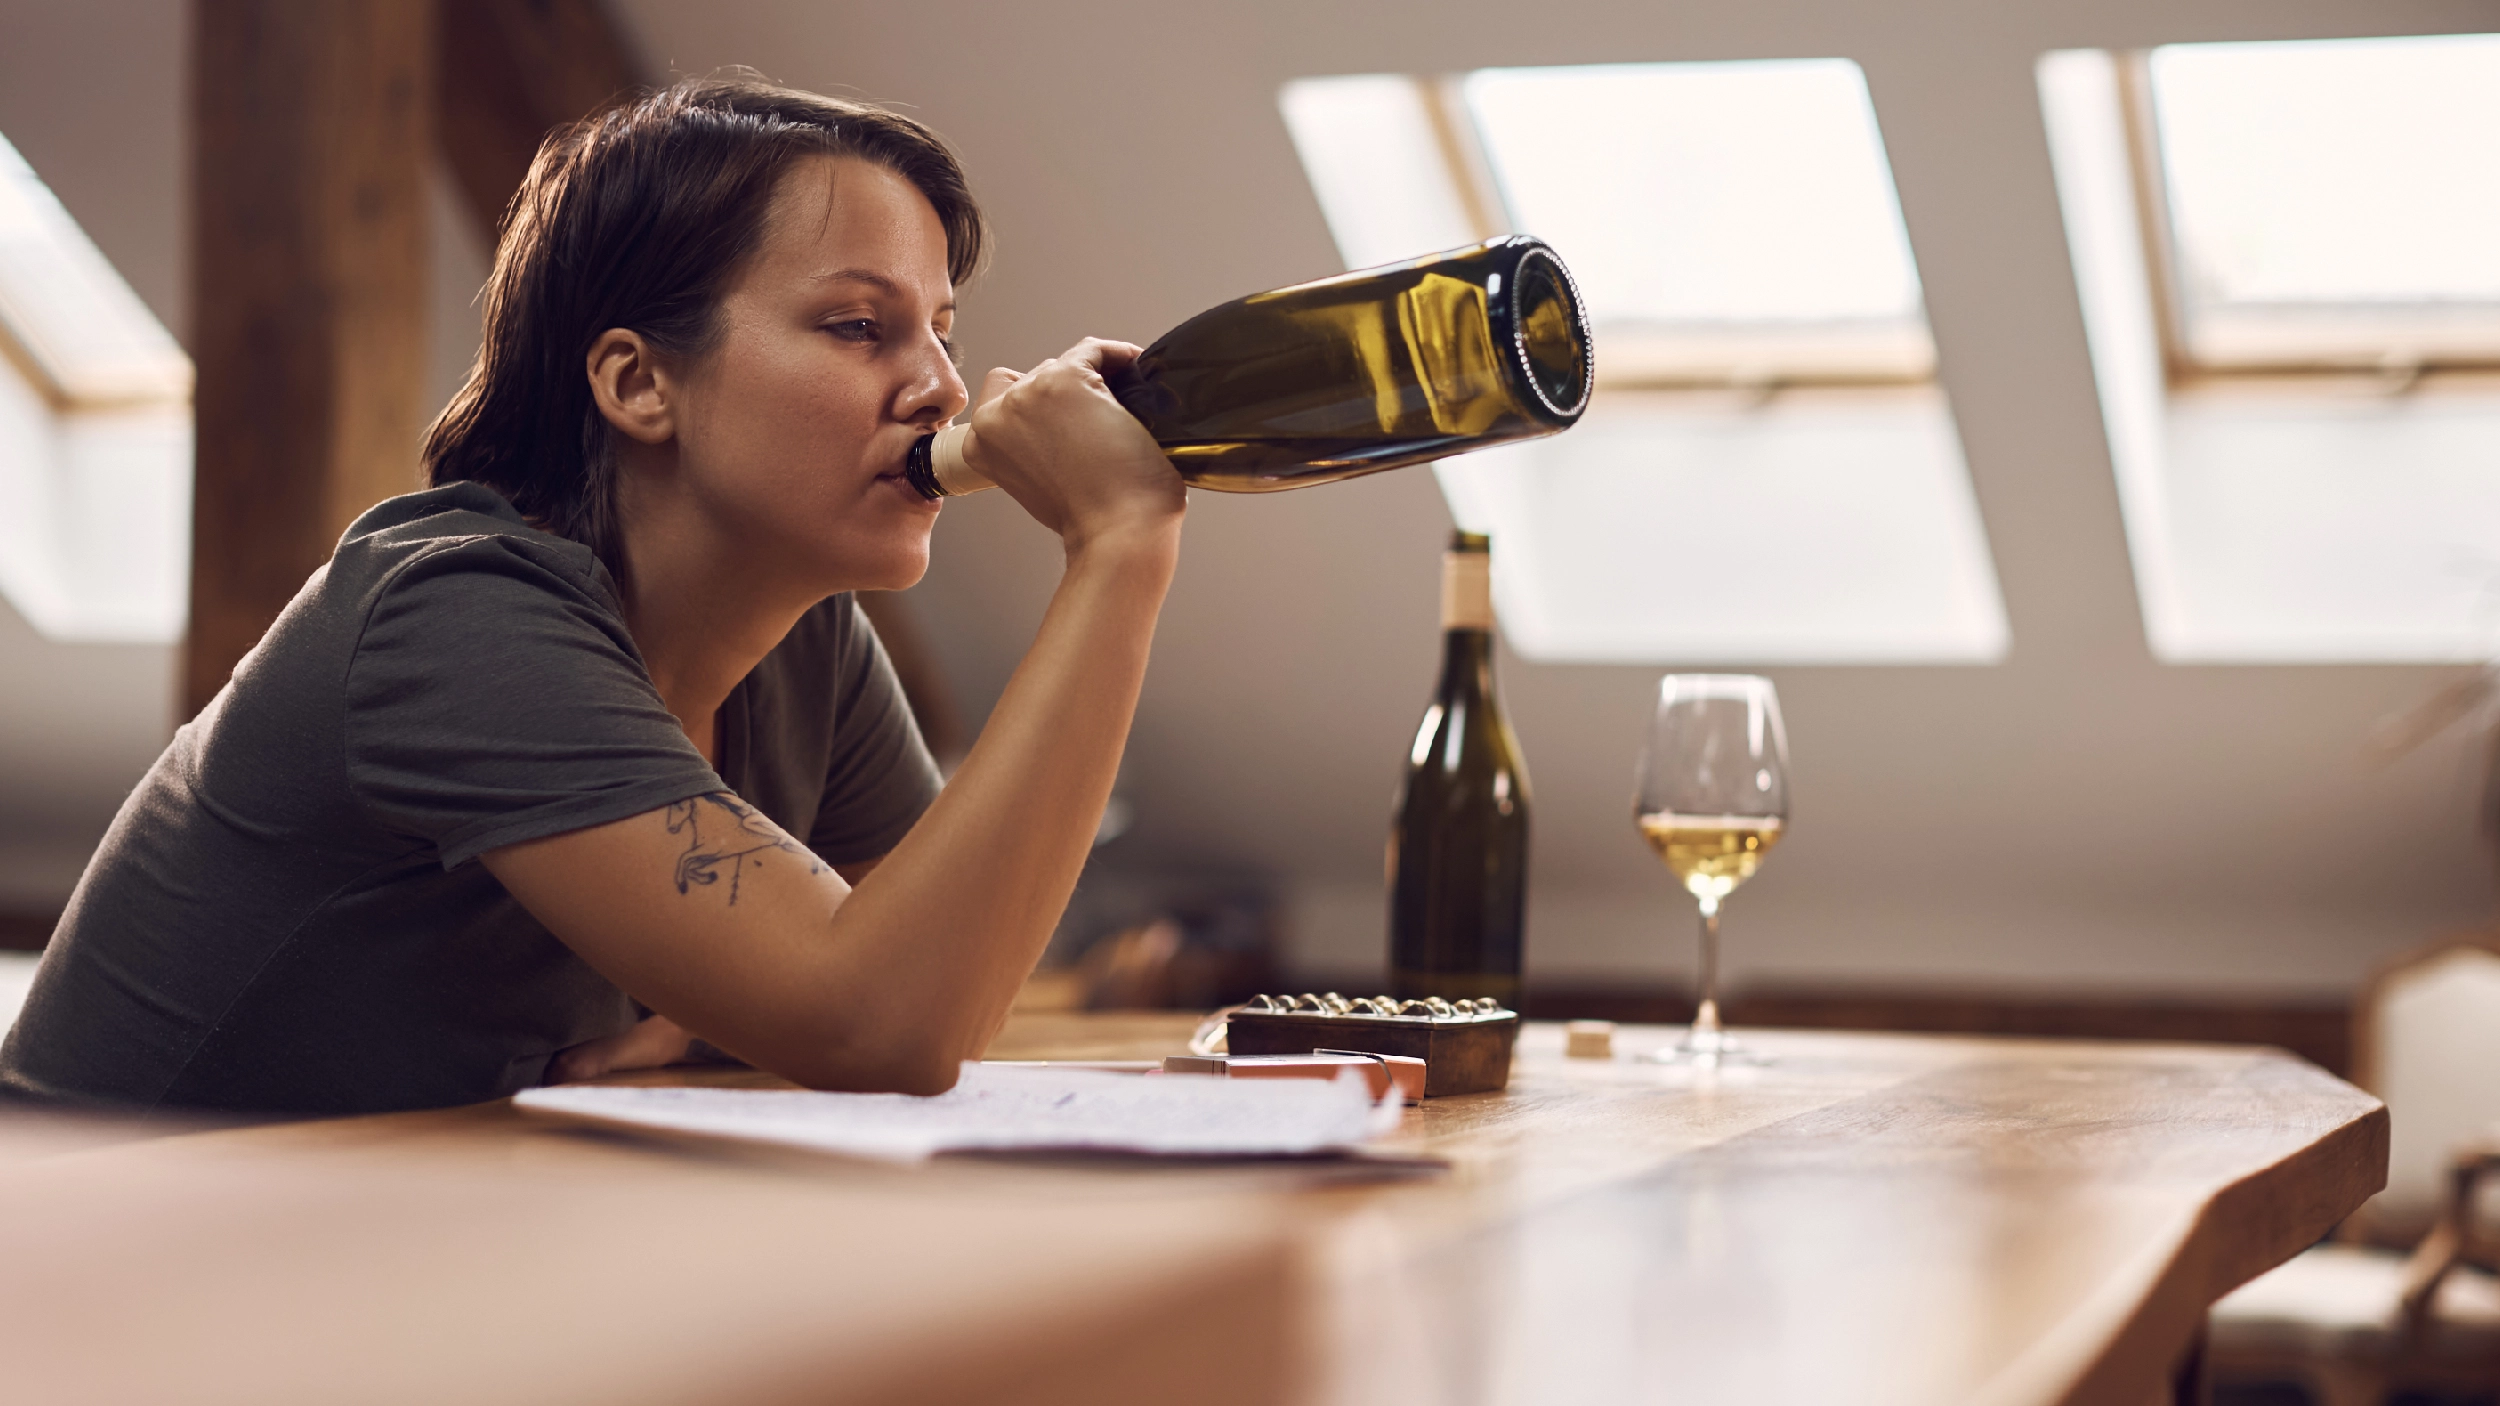 Person drinking wine straight from the bottle. Graphic lists long-term dangers of binge drinking, including heart problems and liver damage.